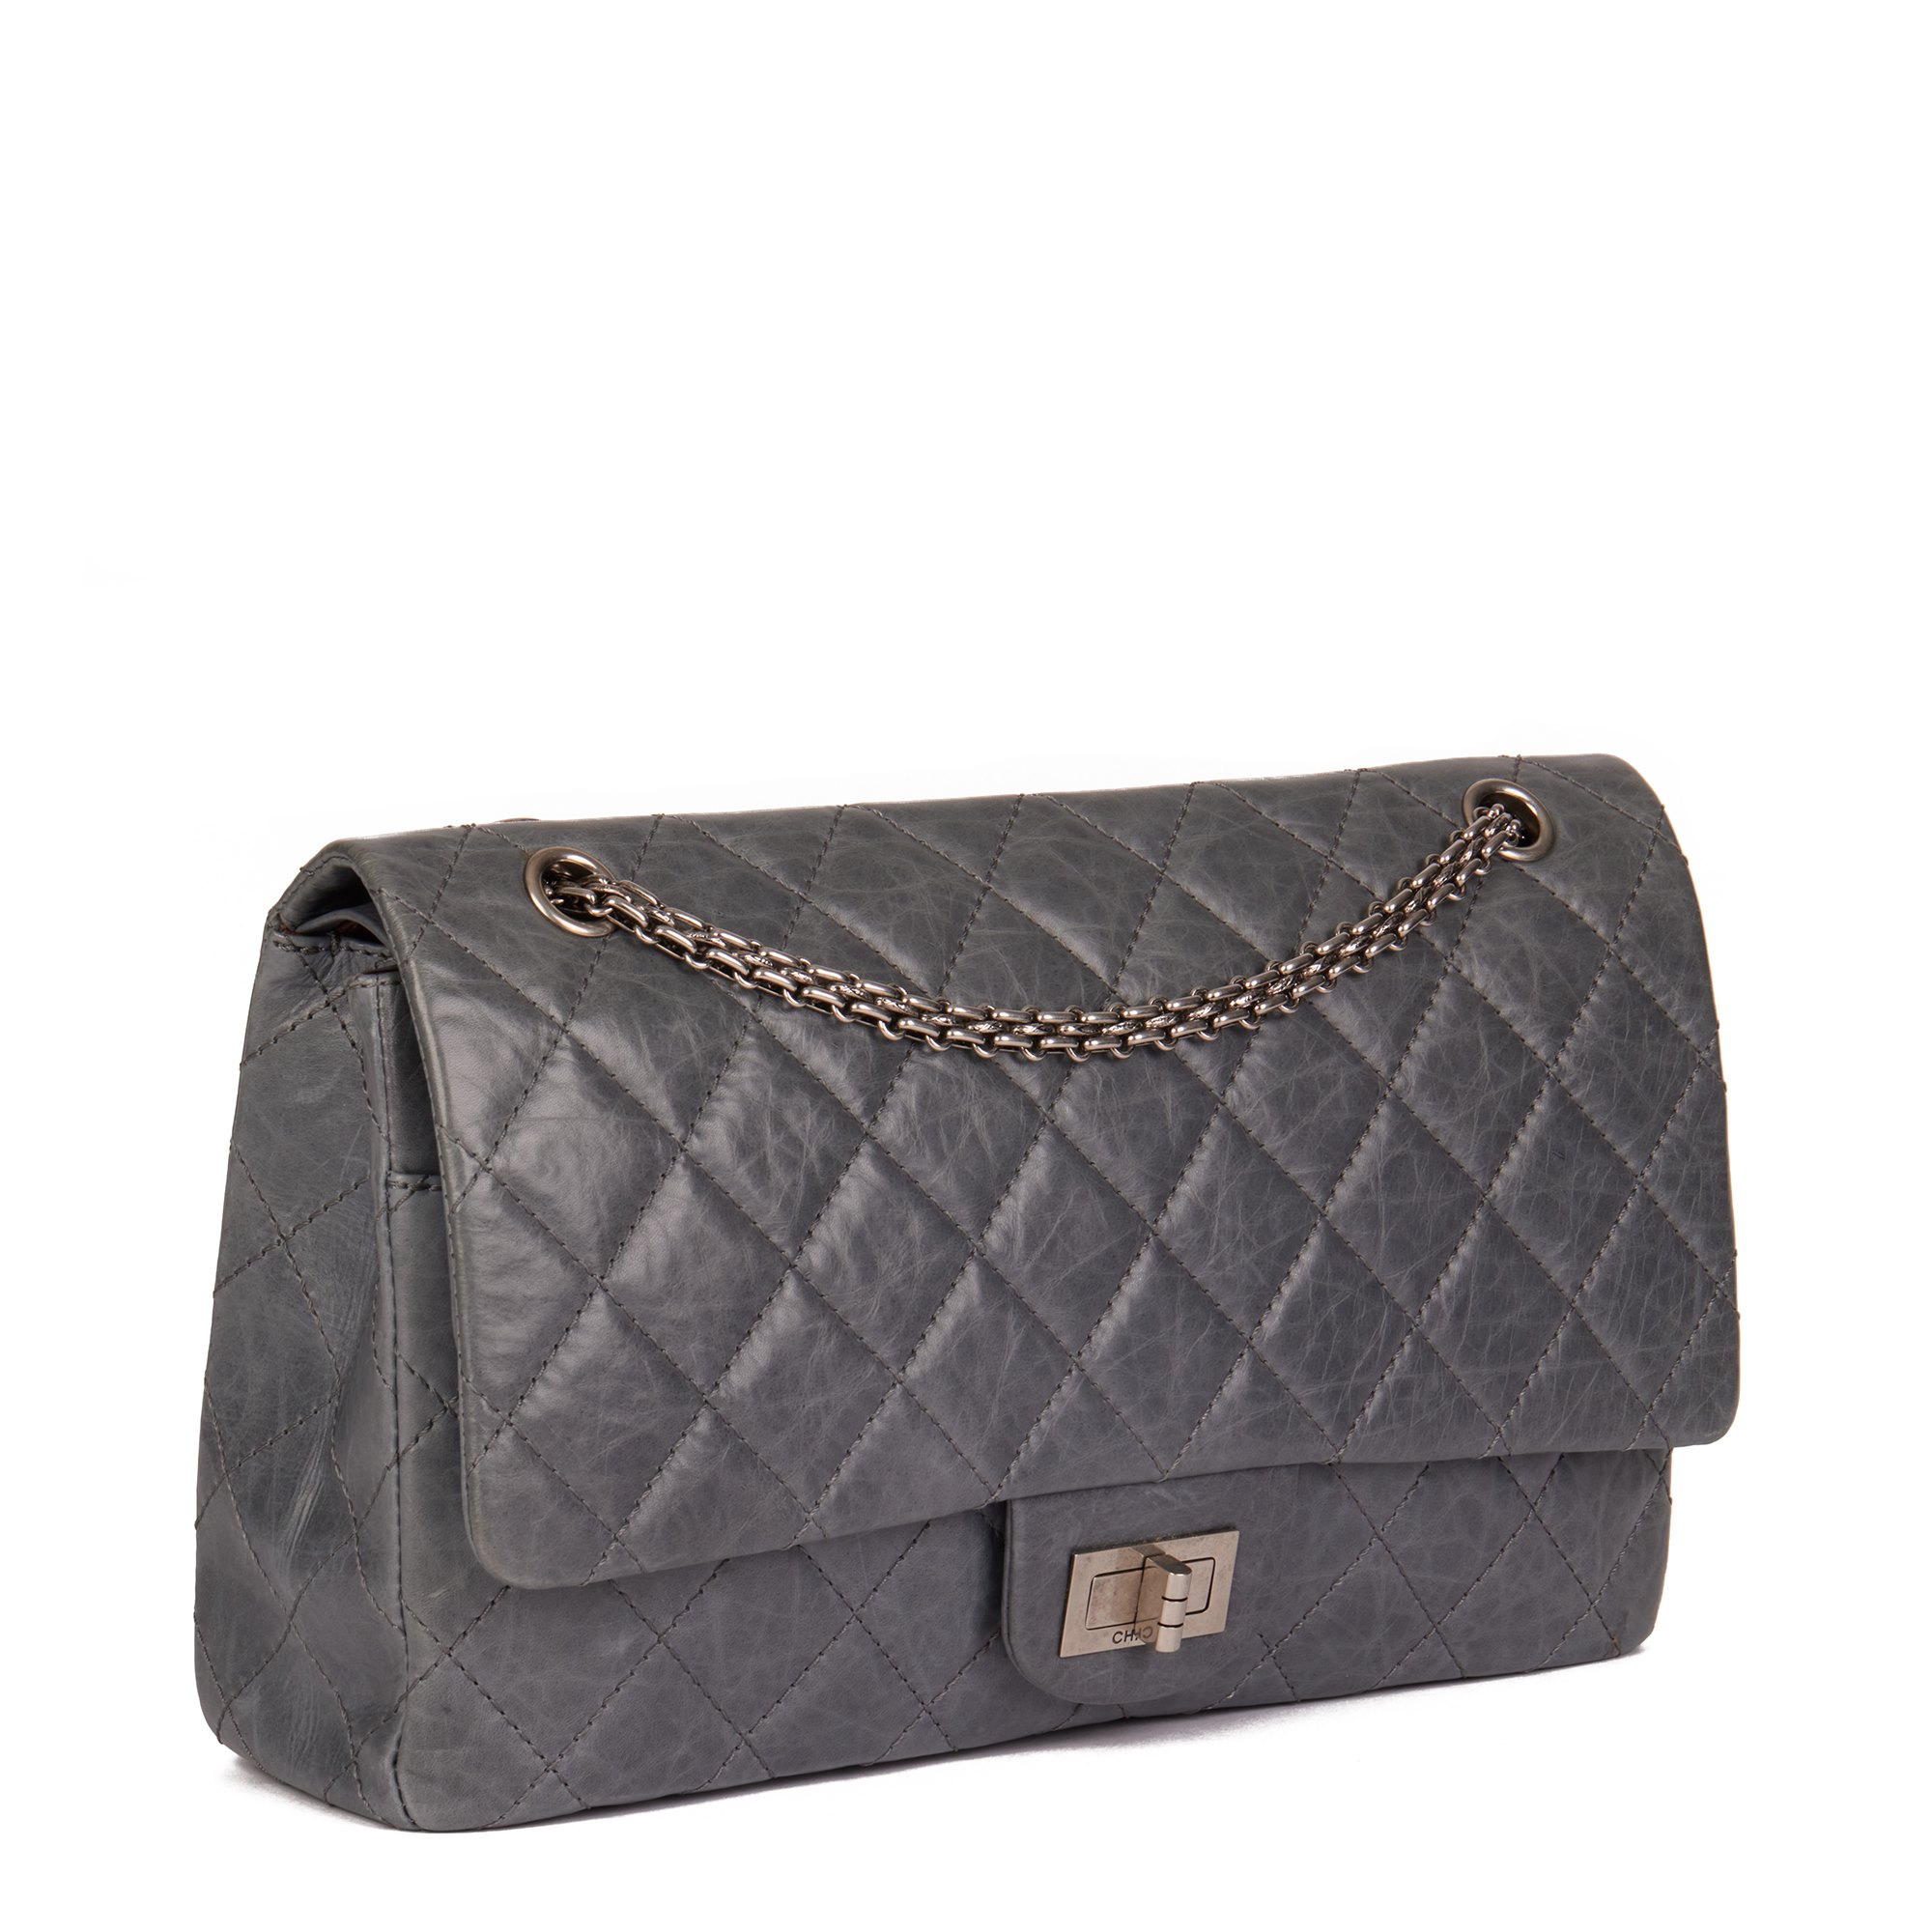 Chanel Grey Quilted Aged Calfskin Leather 2005 50th Anniversary Edition 227 2.55 Reissue Double Flap Bag